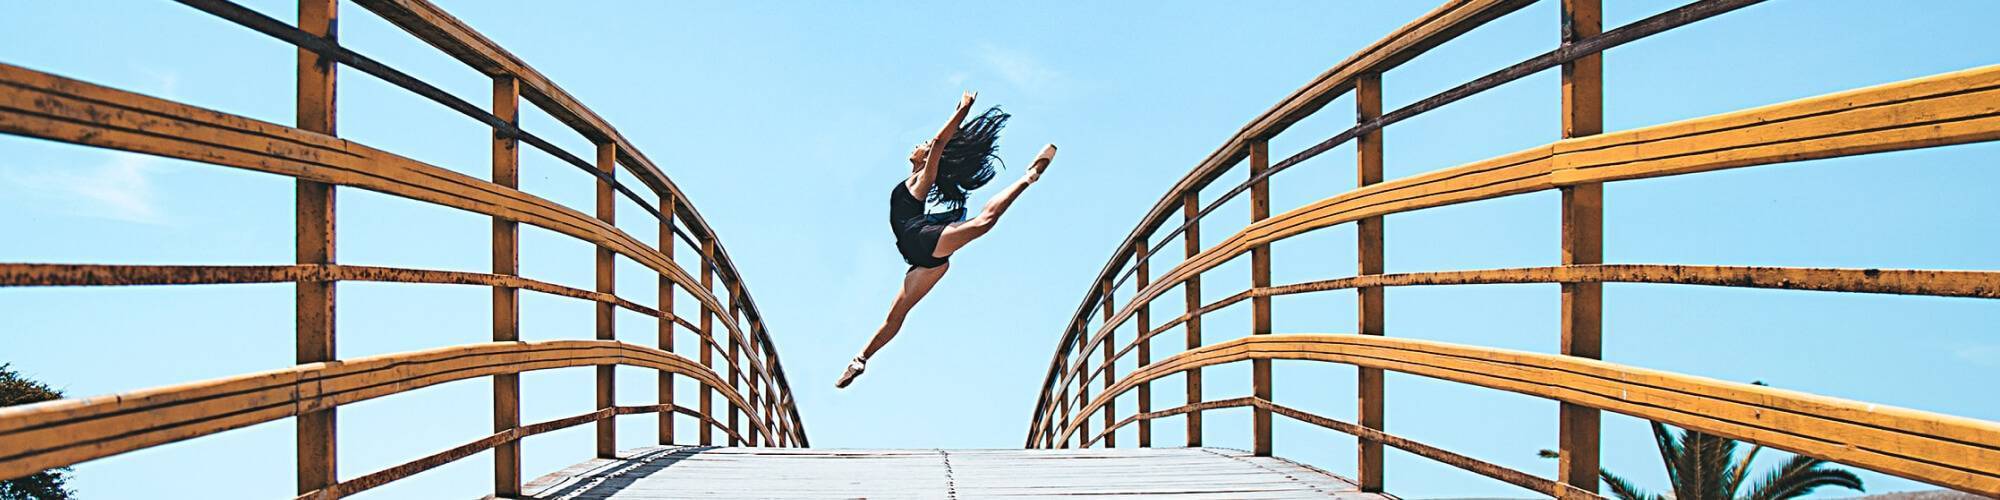 ballerina jumps in the distance with a wakling bridge in the foreground